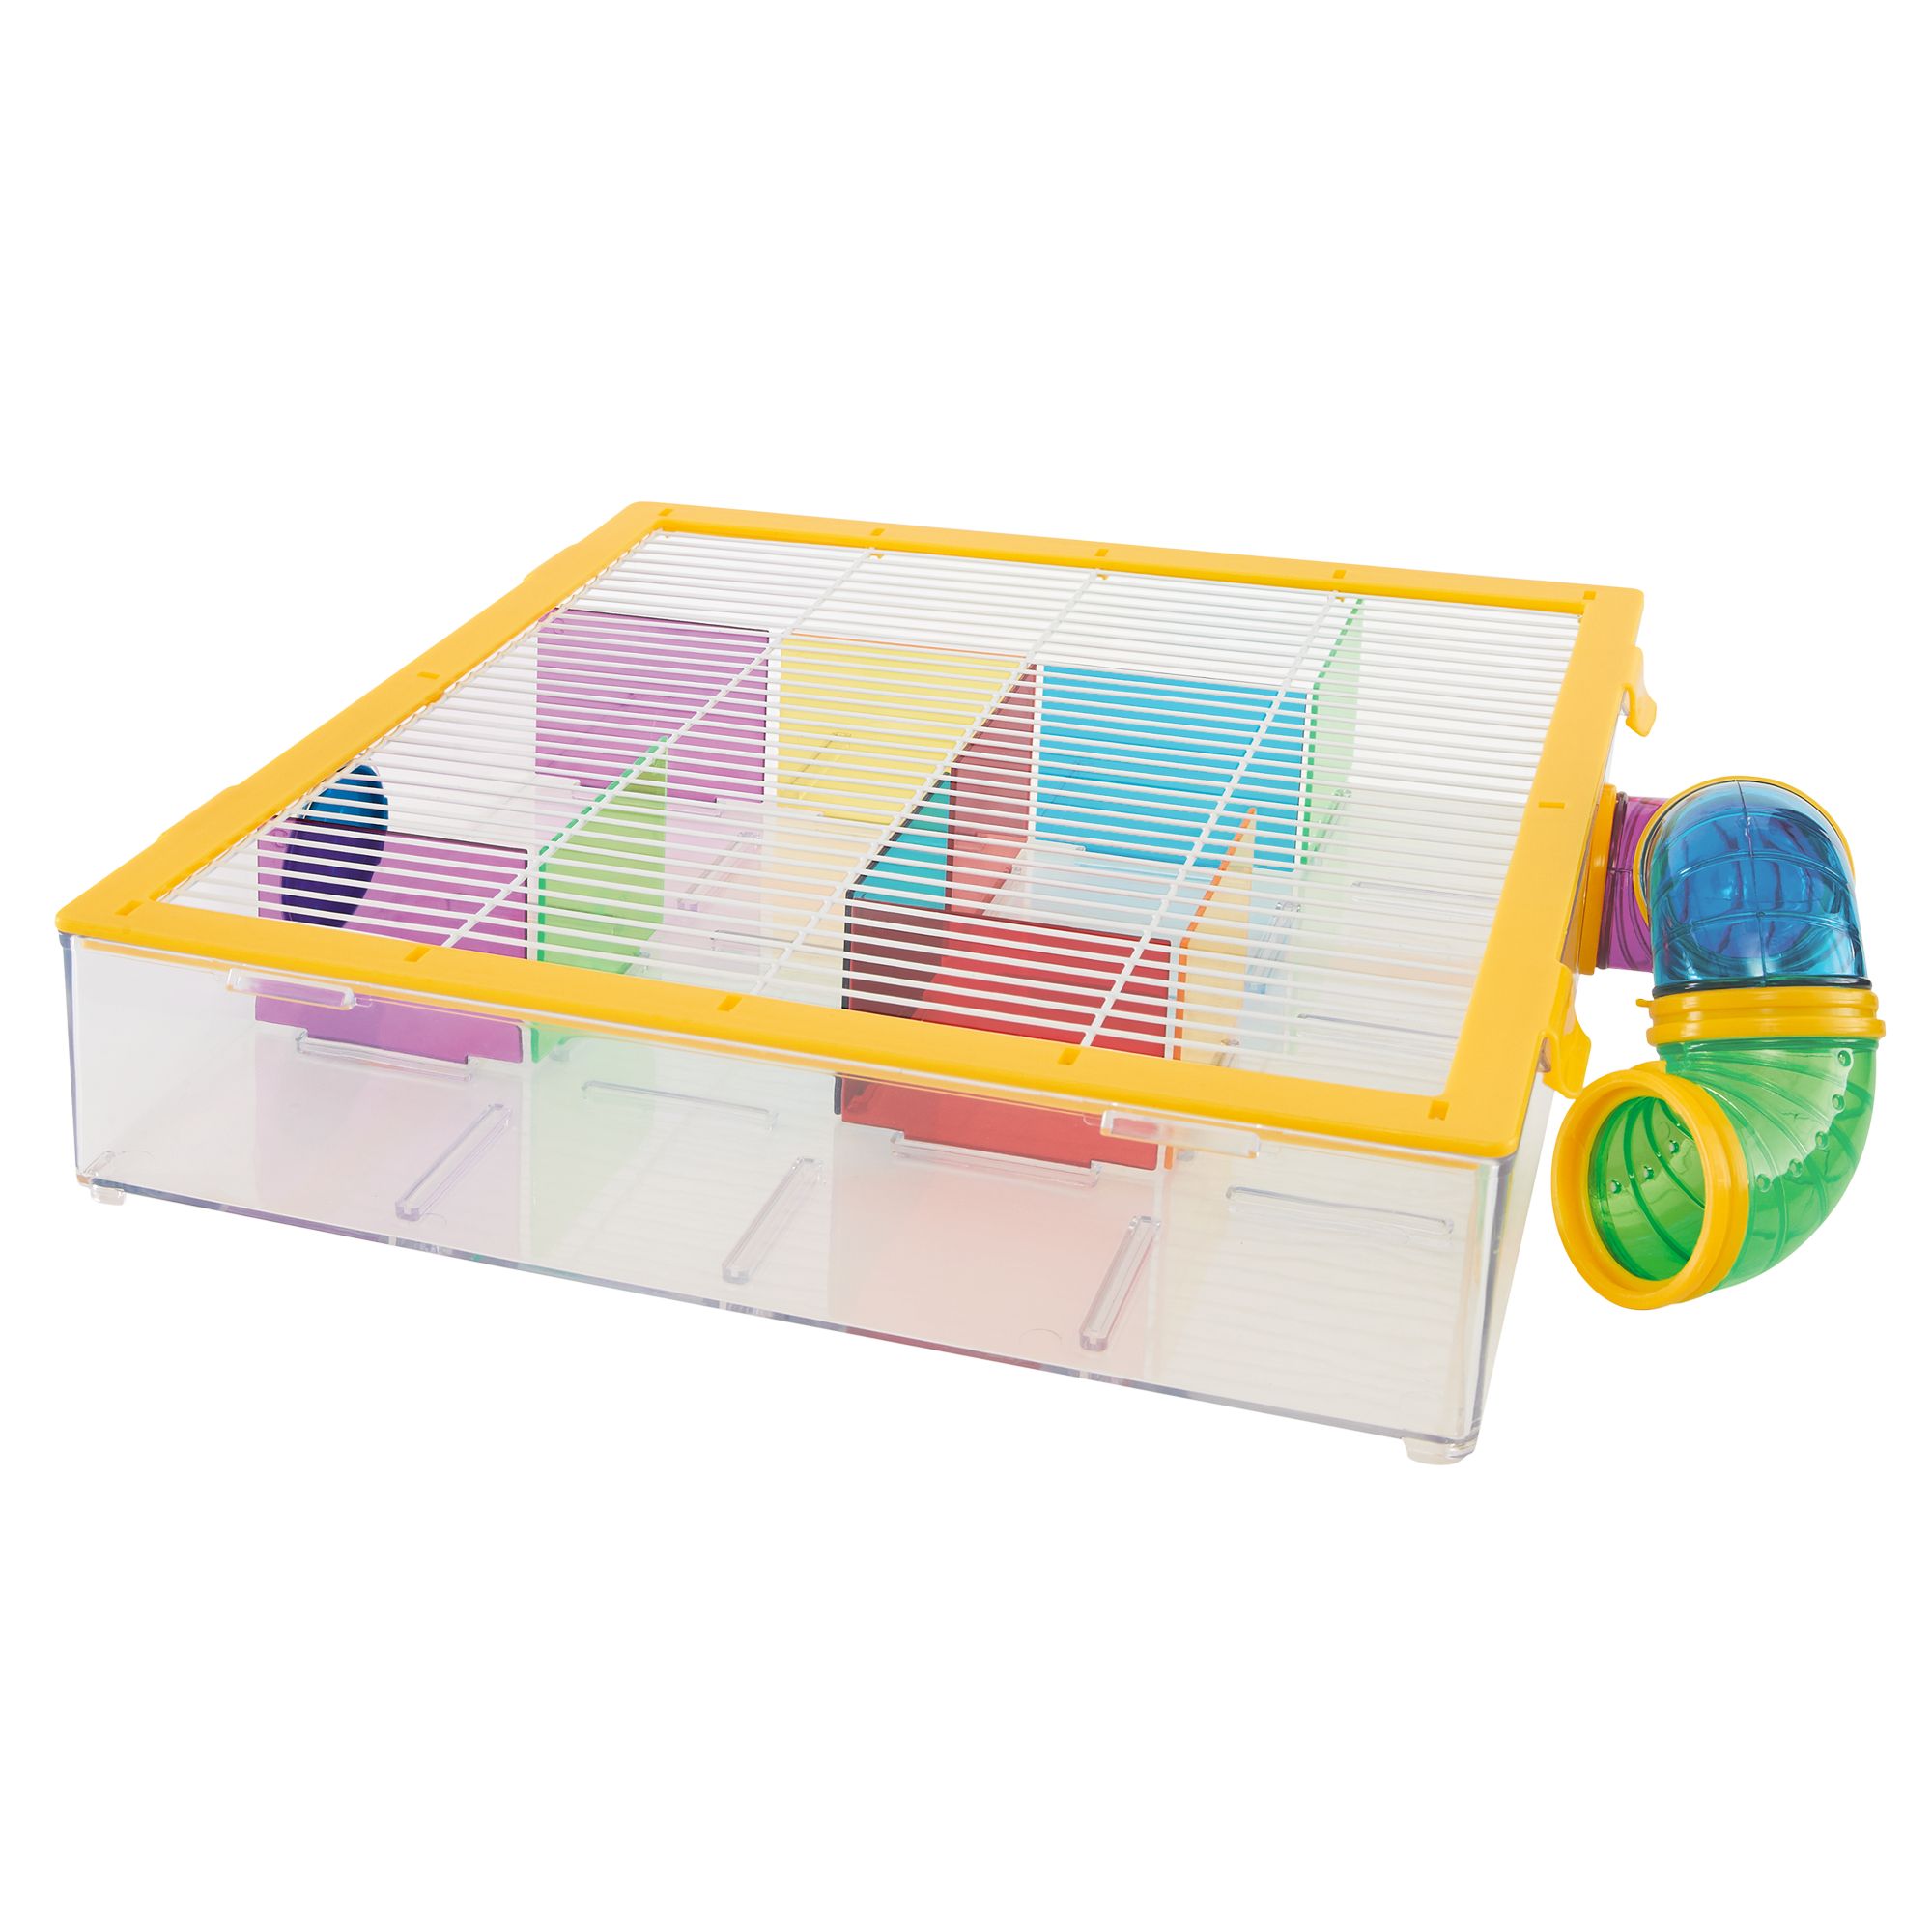 Build-Your-Own Hamster Maze Kit 